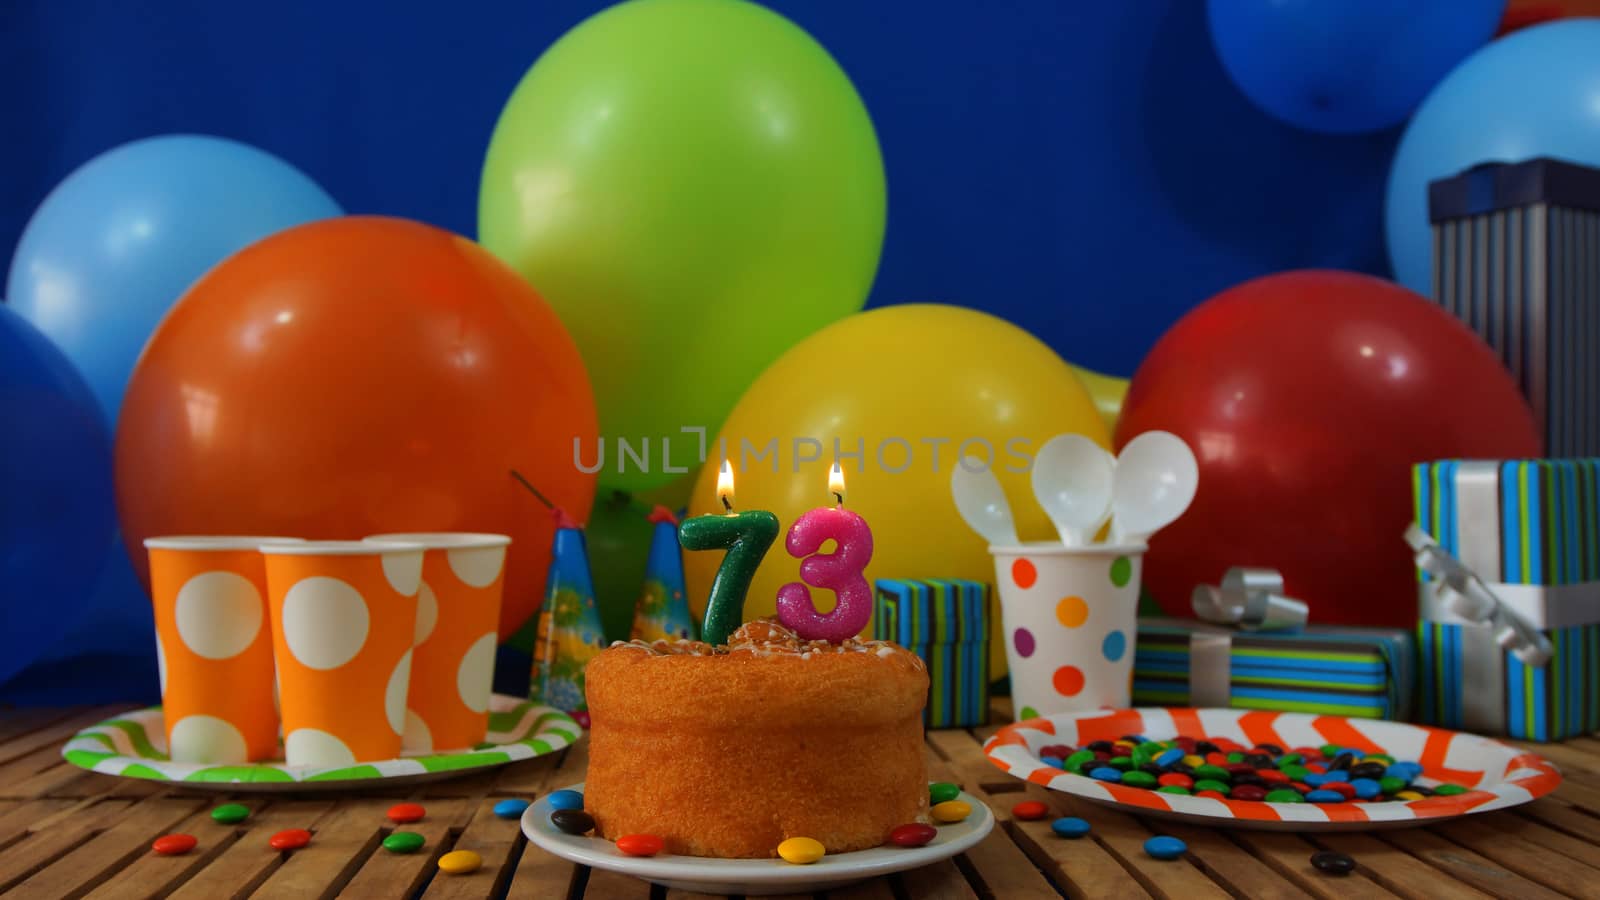 Birthday cake on rustic wooden table with background of colorful balloons, gifts, plastic cups and plastic plate with candies and blue wall in the background by alejomiranda